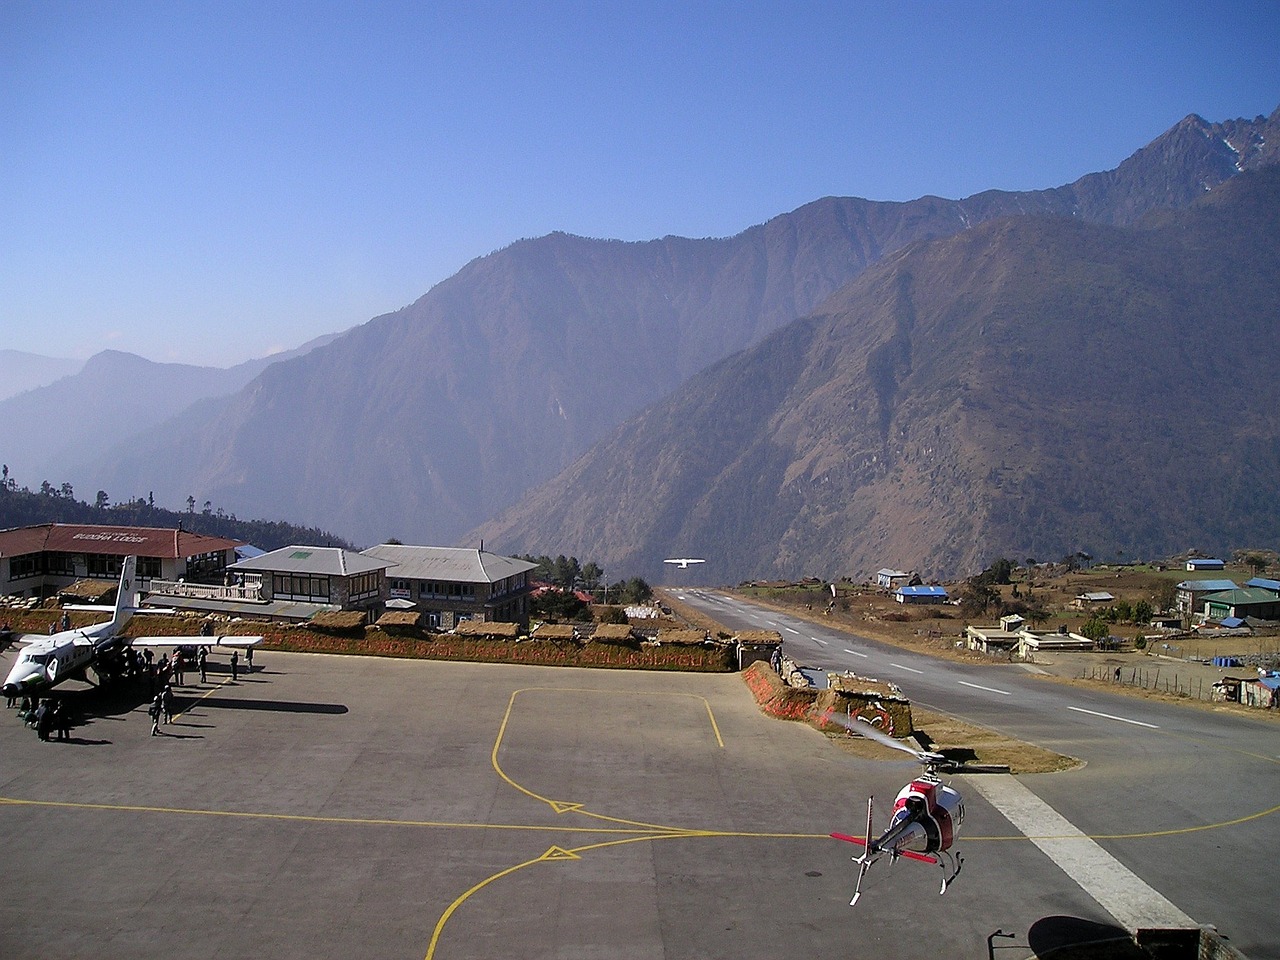 More than 48 daily flights operate from Manthali to Lukla.